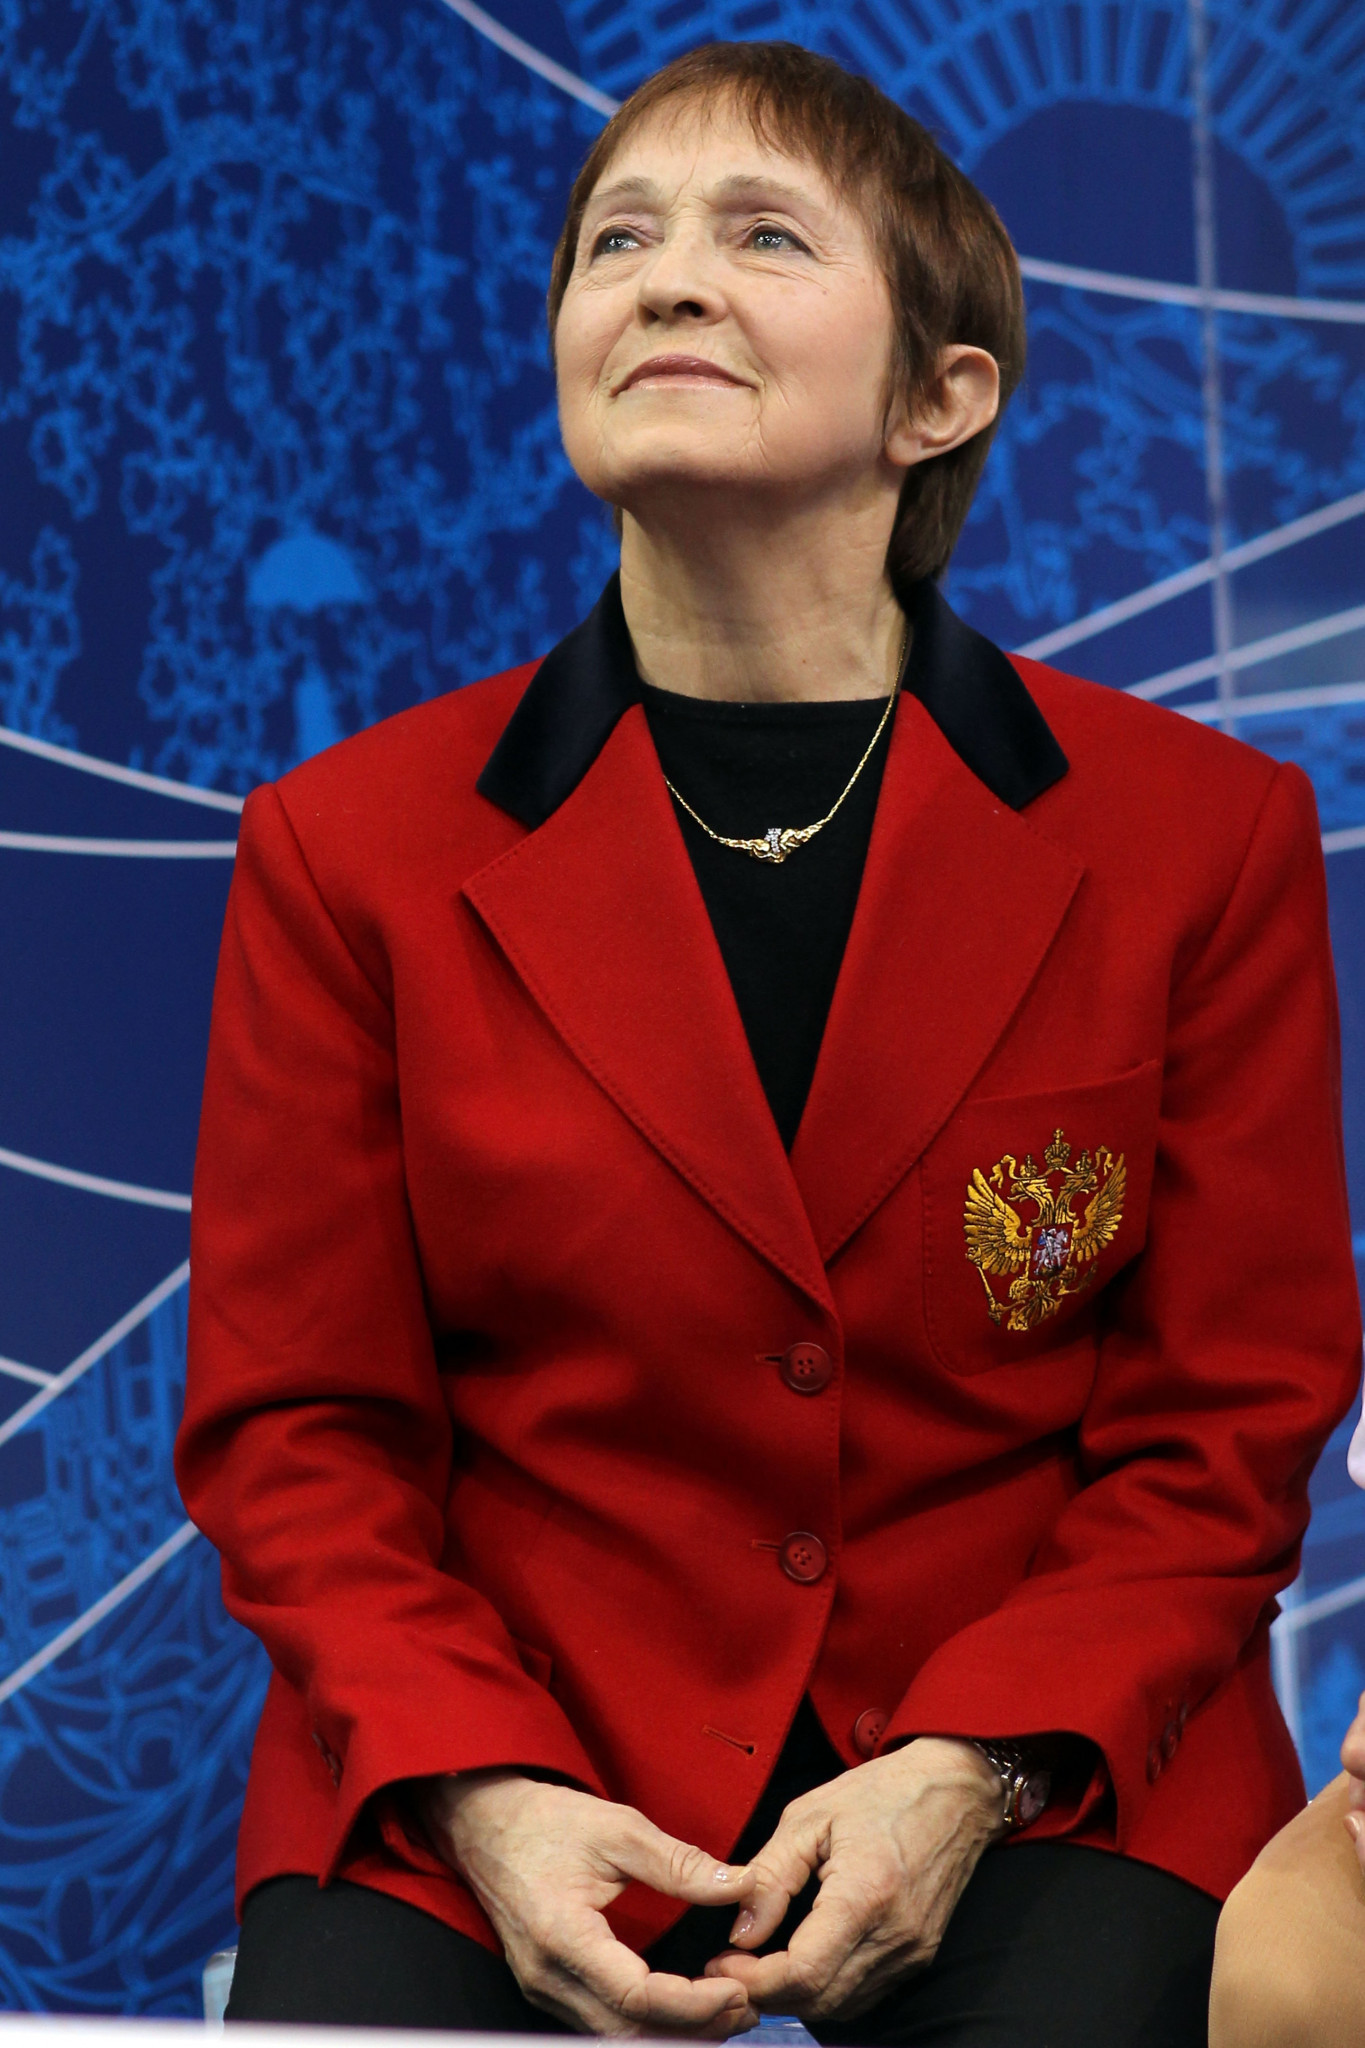 Tamara Moskvina, the most successful pairs figure skating coach in the world was honoured at the virtual ISU Awards ©Getty Images